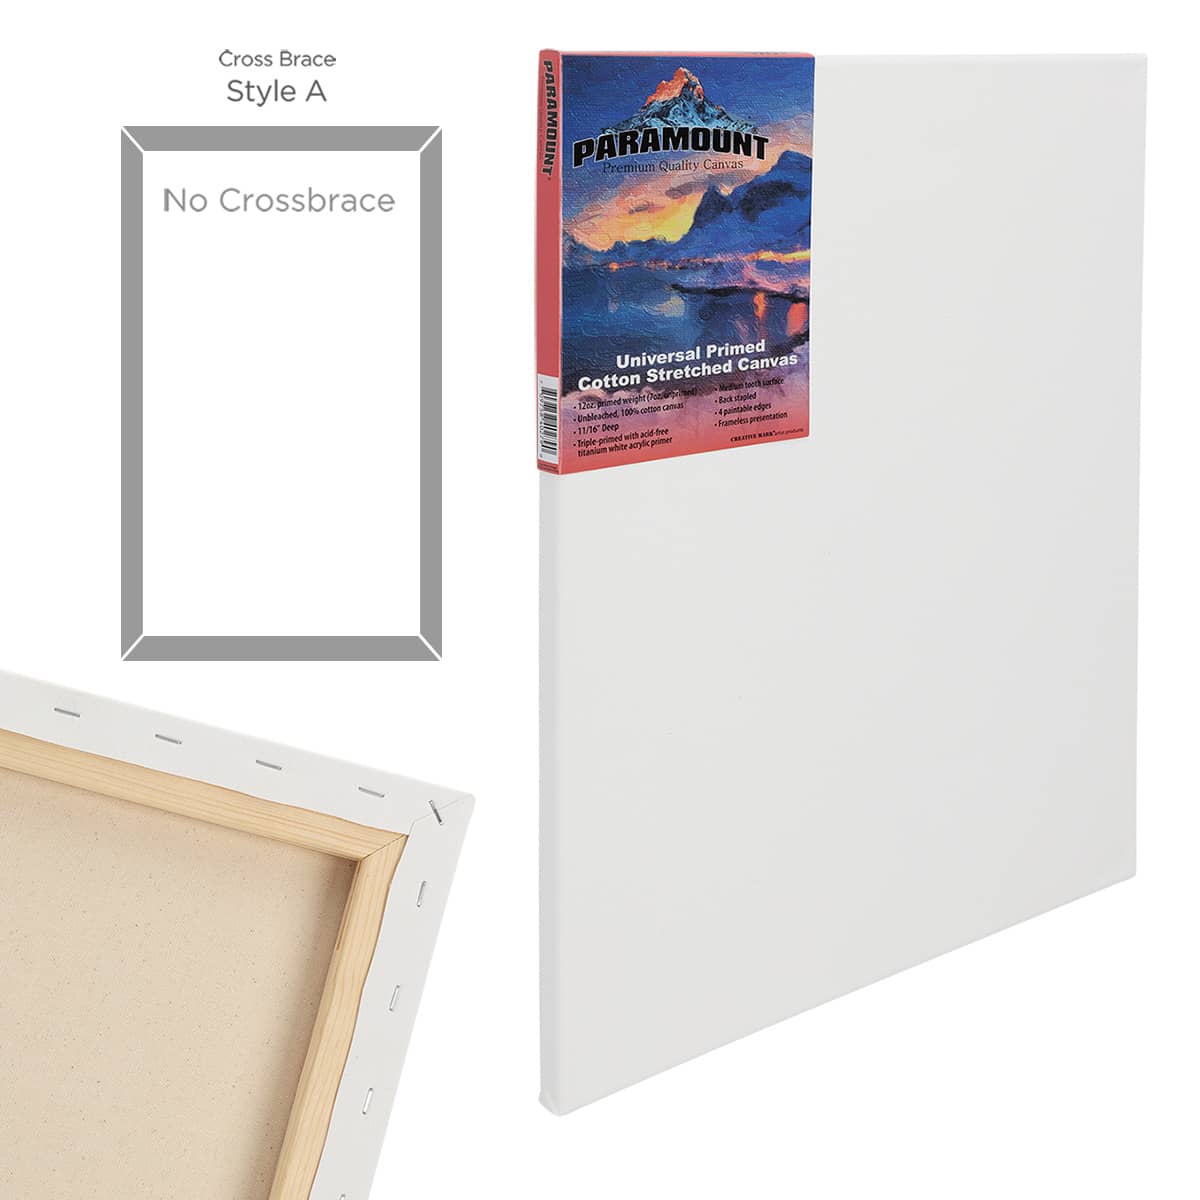 Paramount 11/16" Professional Cotton Stretched Canvas - 9x12"